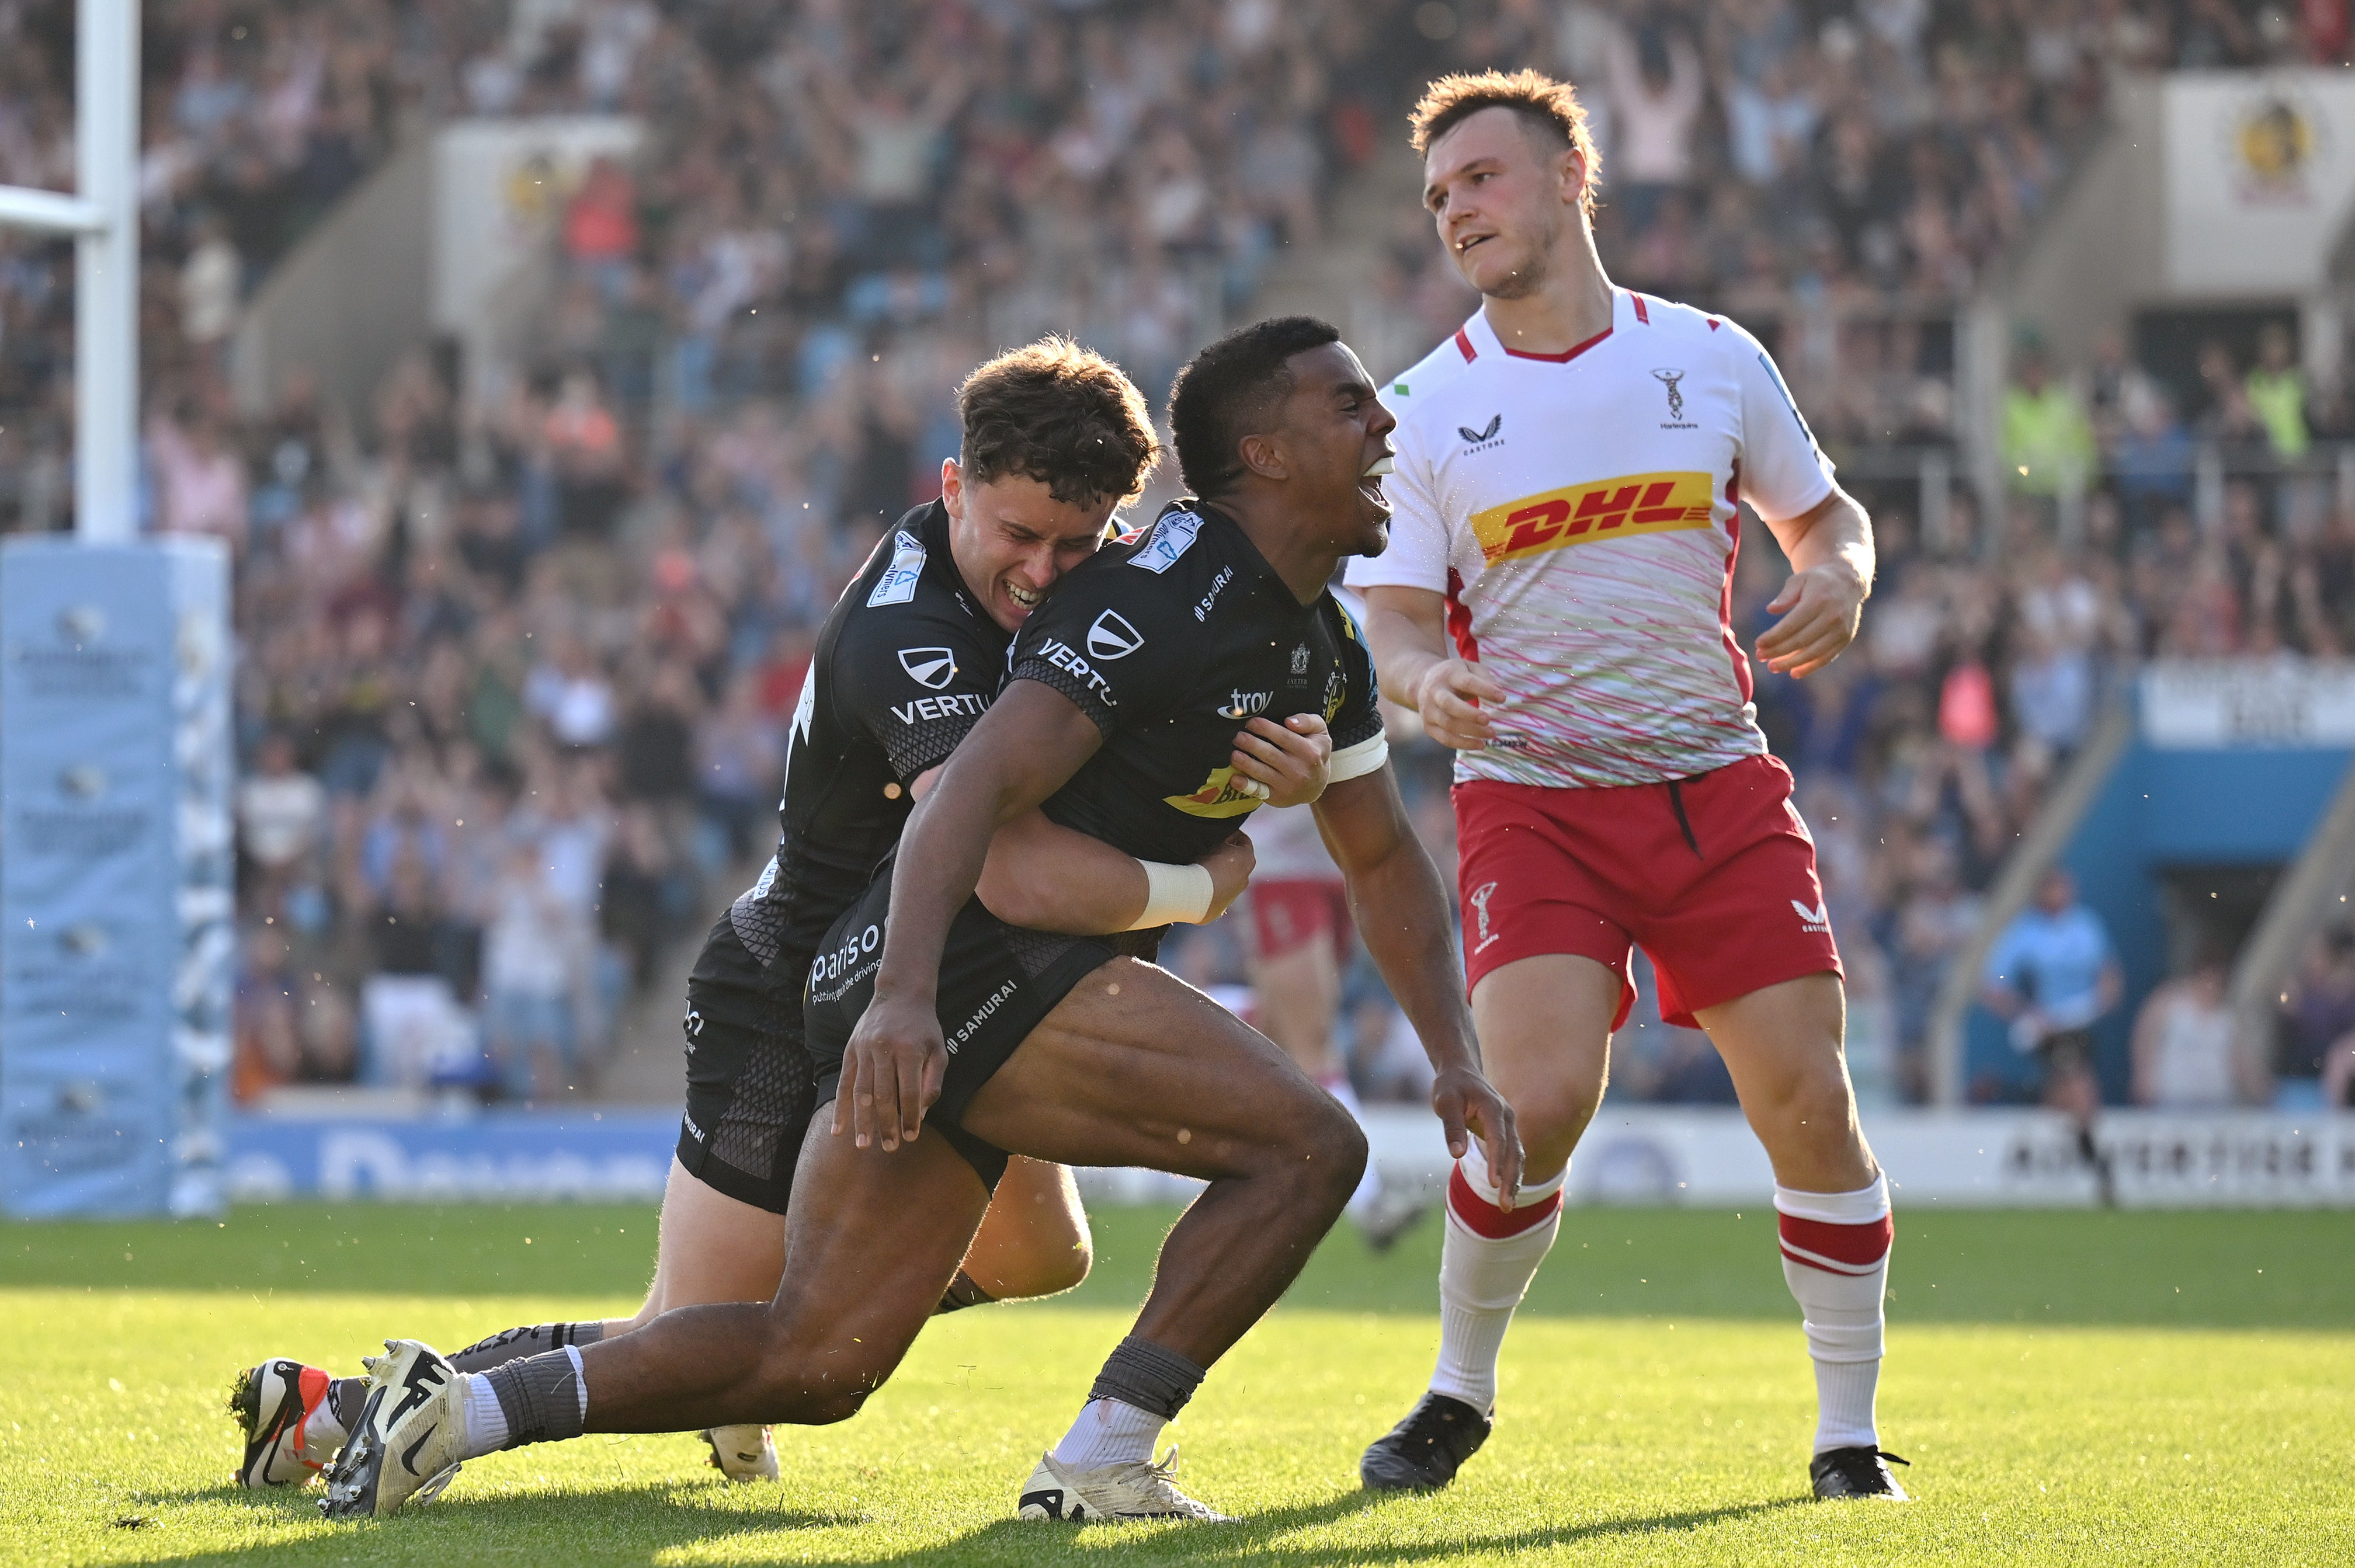 Immanuel Feyi-Waboso scored two tried in exeter win over Harlequins